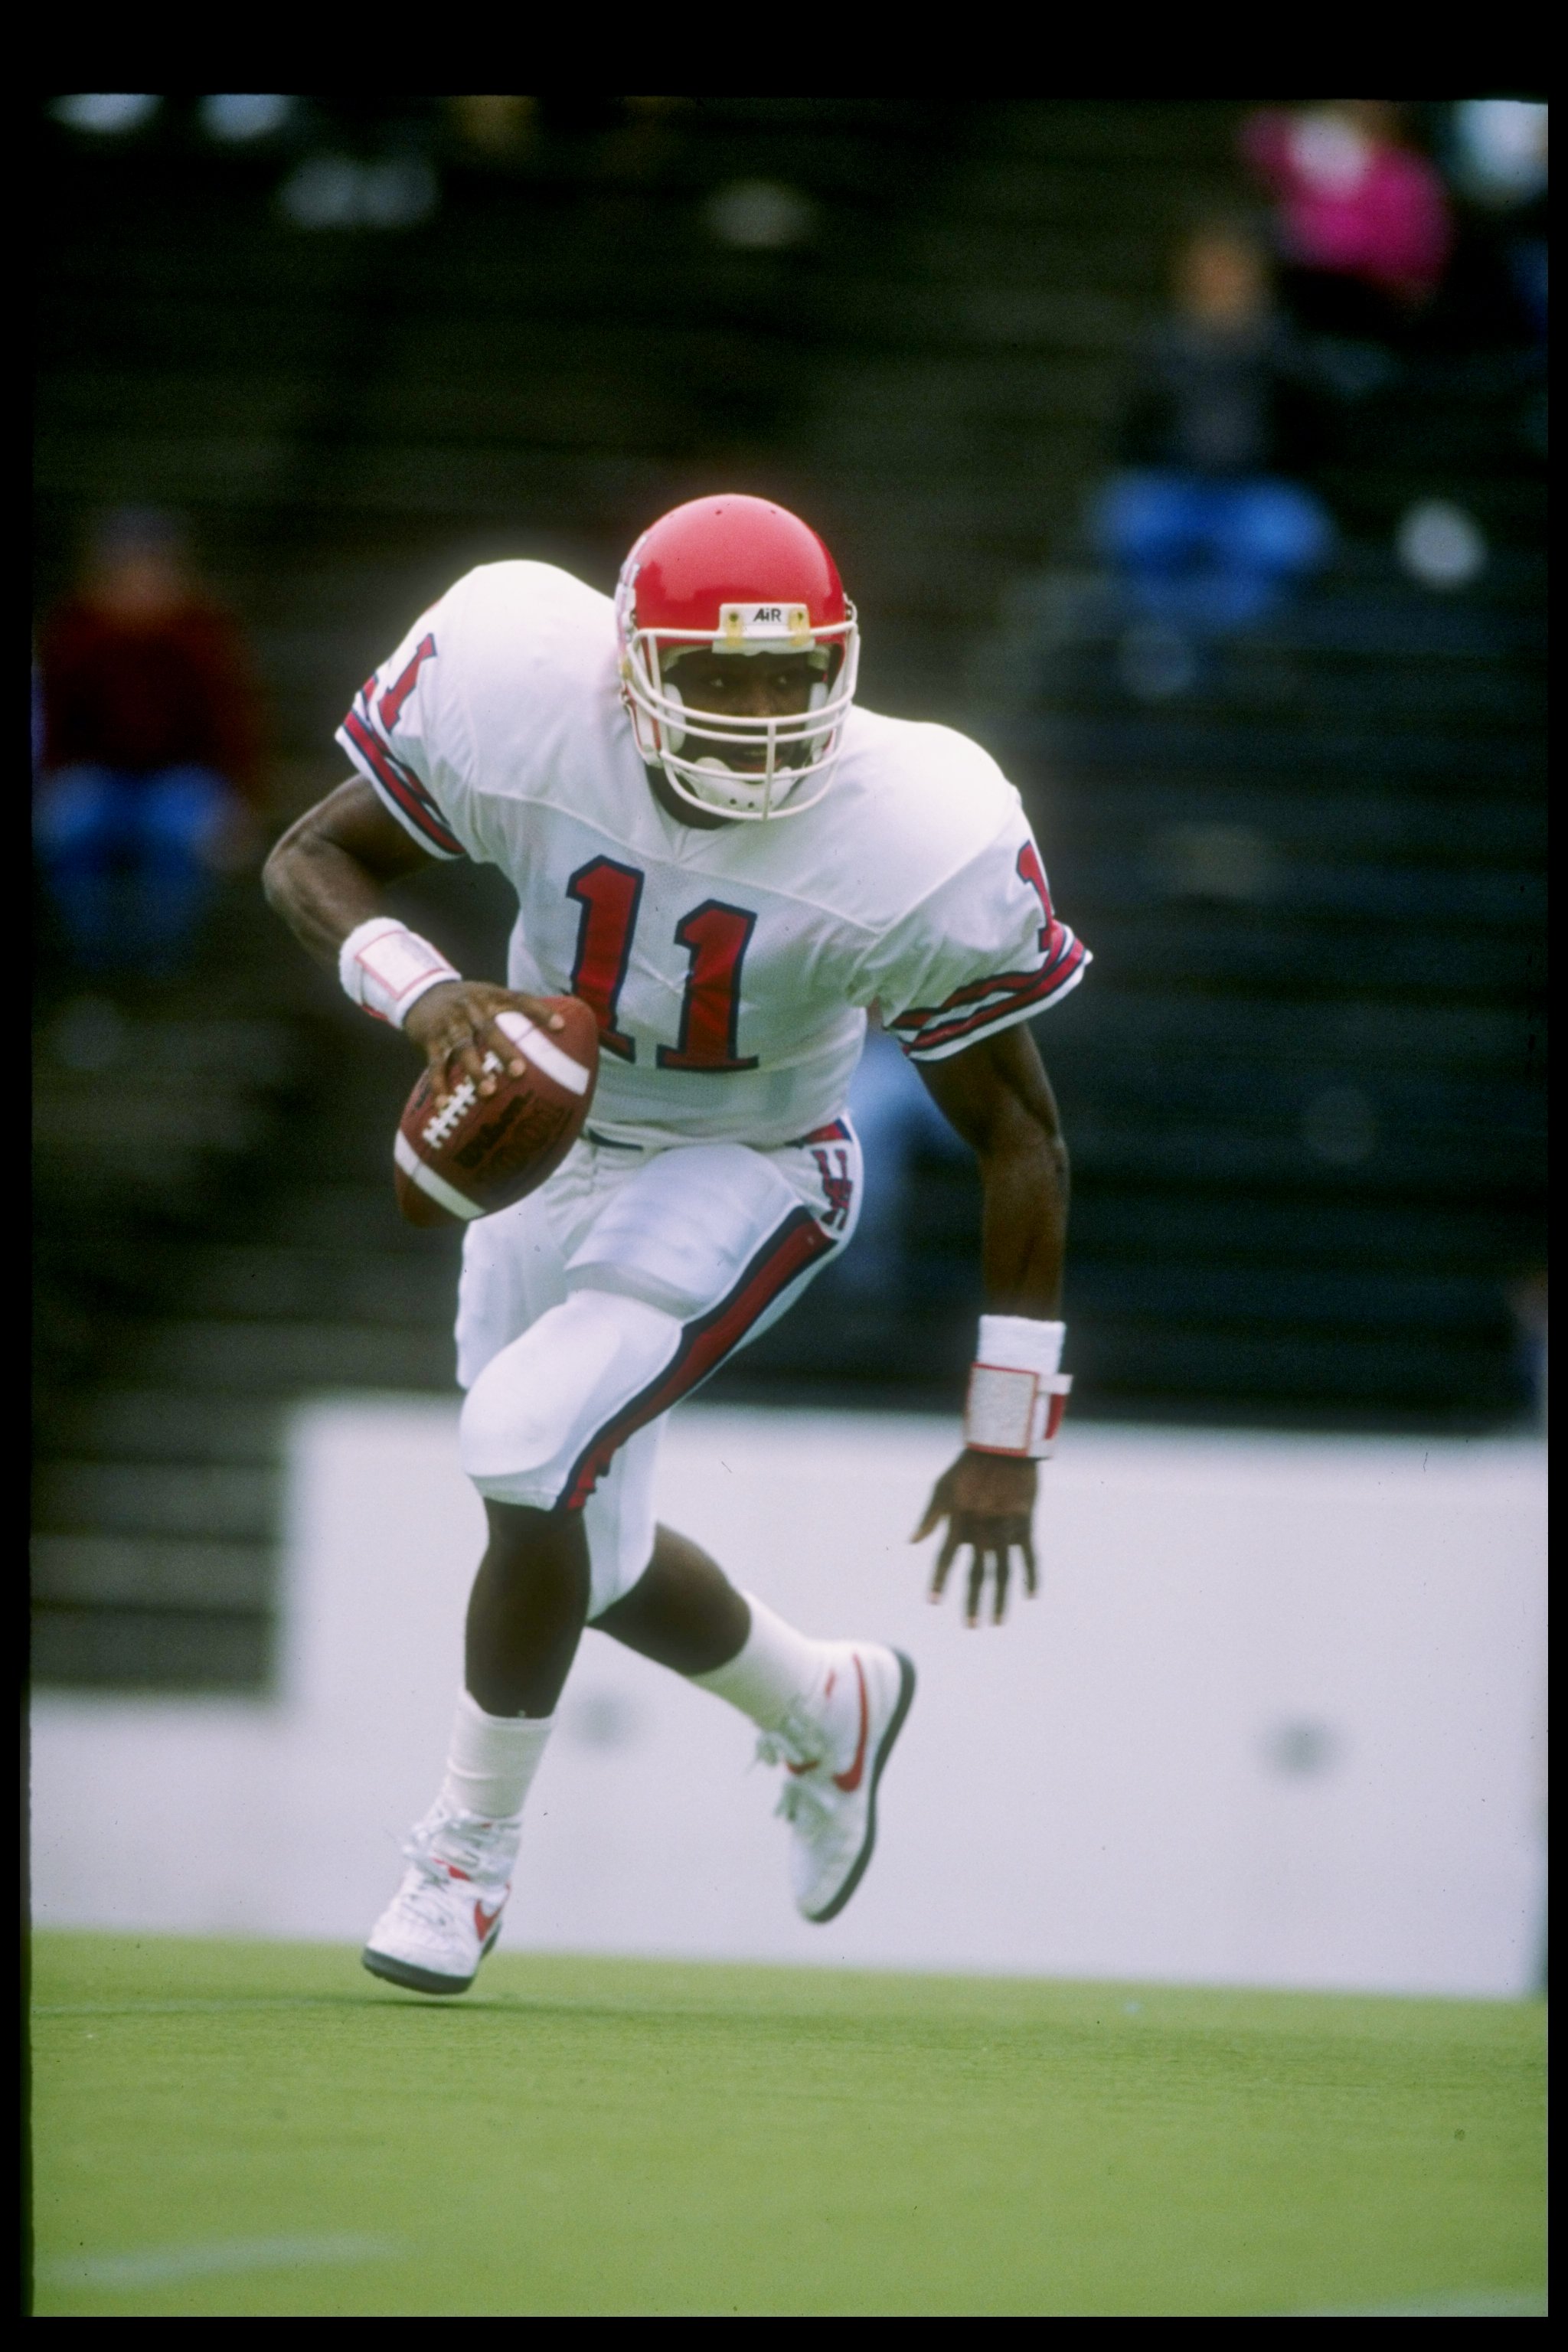 2 Dec 1989: Quarterback Andre Ware #11 of the Houston Cougars in action during a game against the Rice Owls in Houston, Texas. The Houston Cougars won the game 64-0.